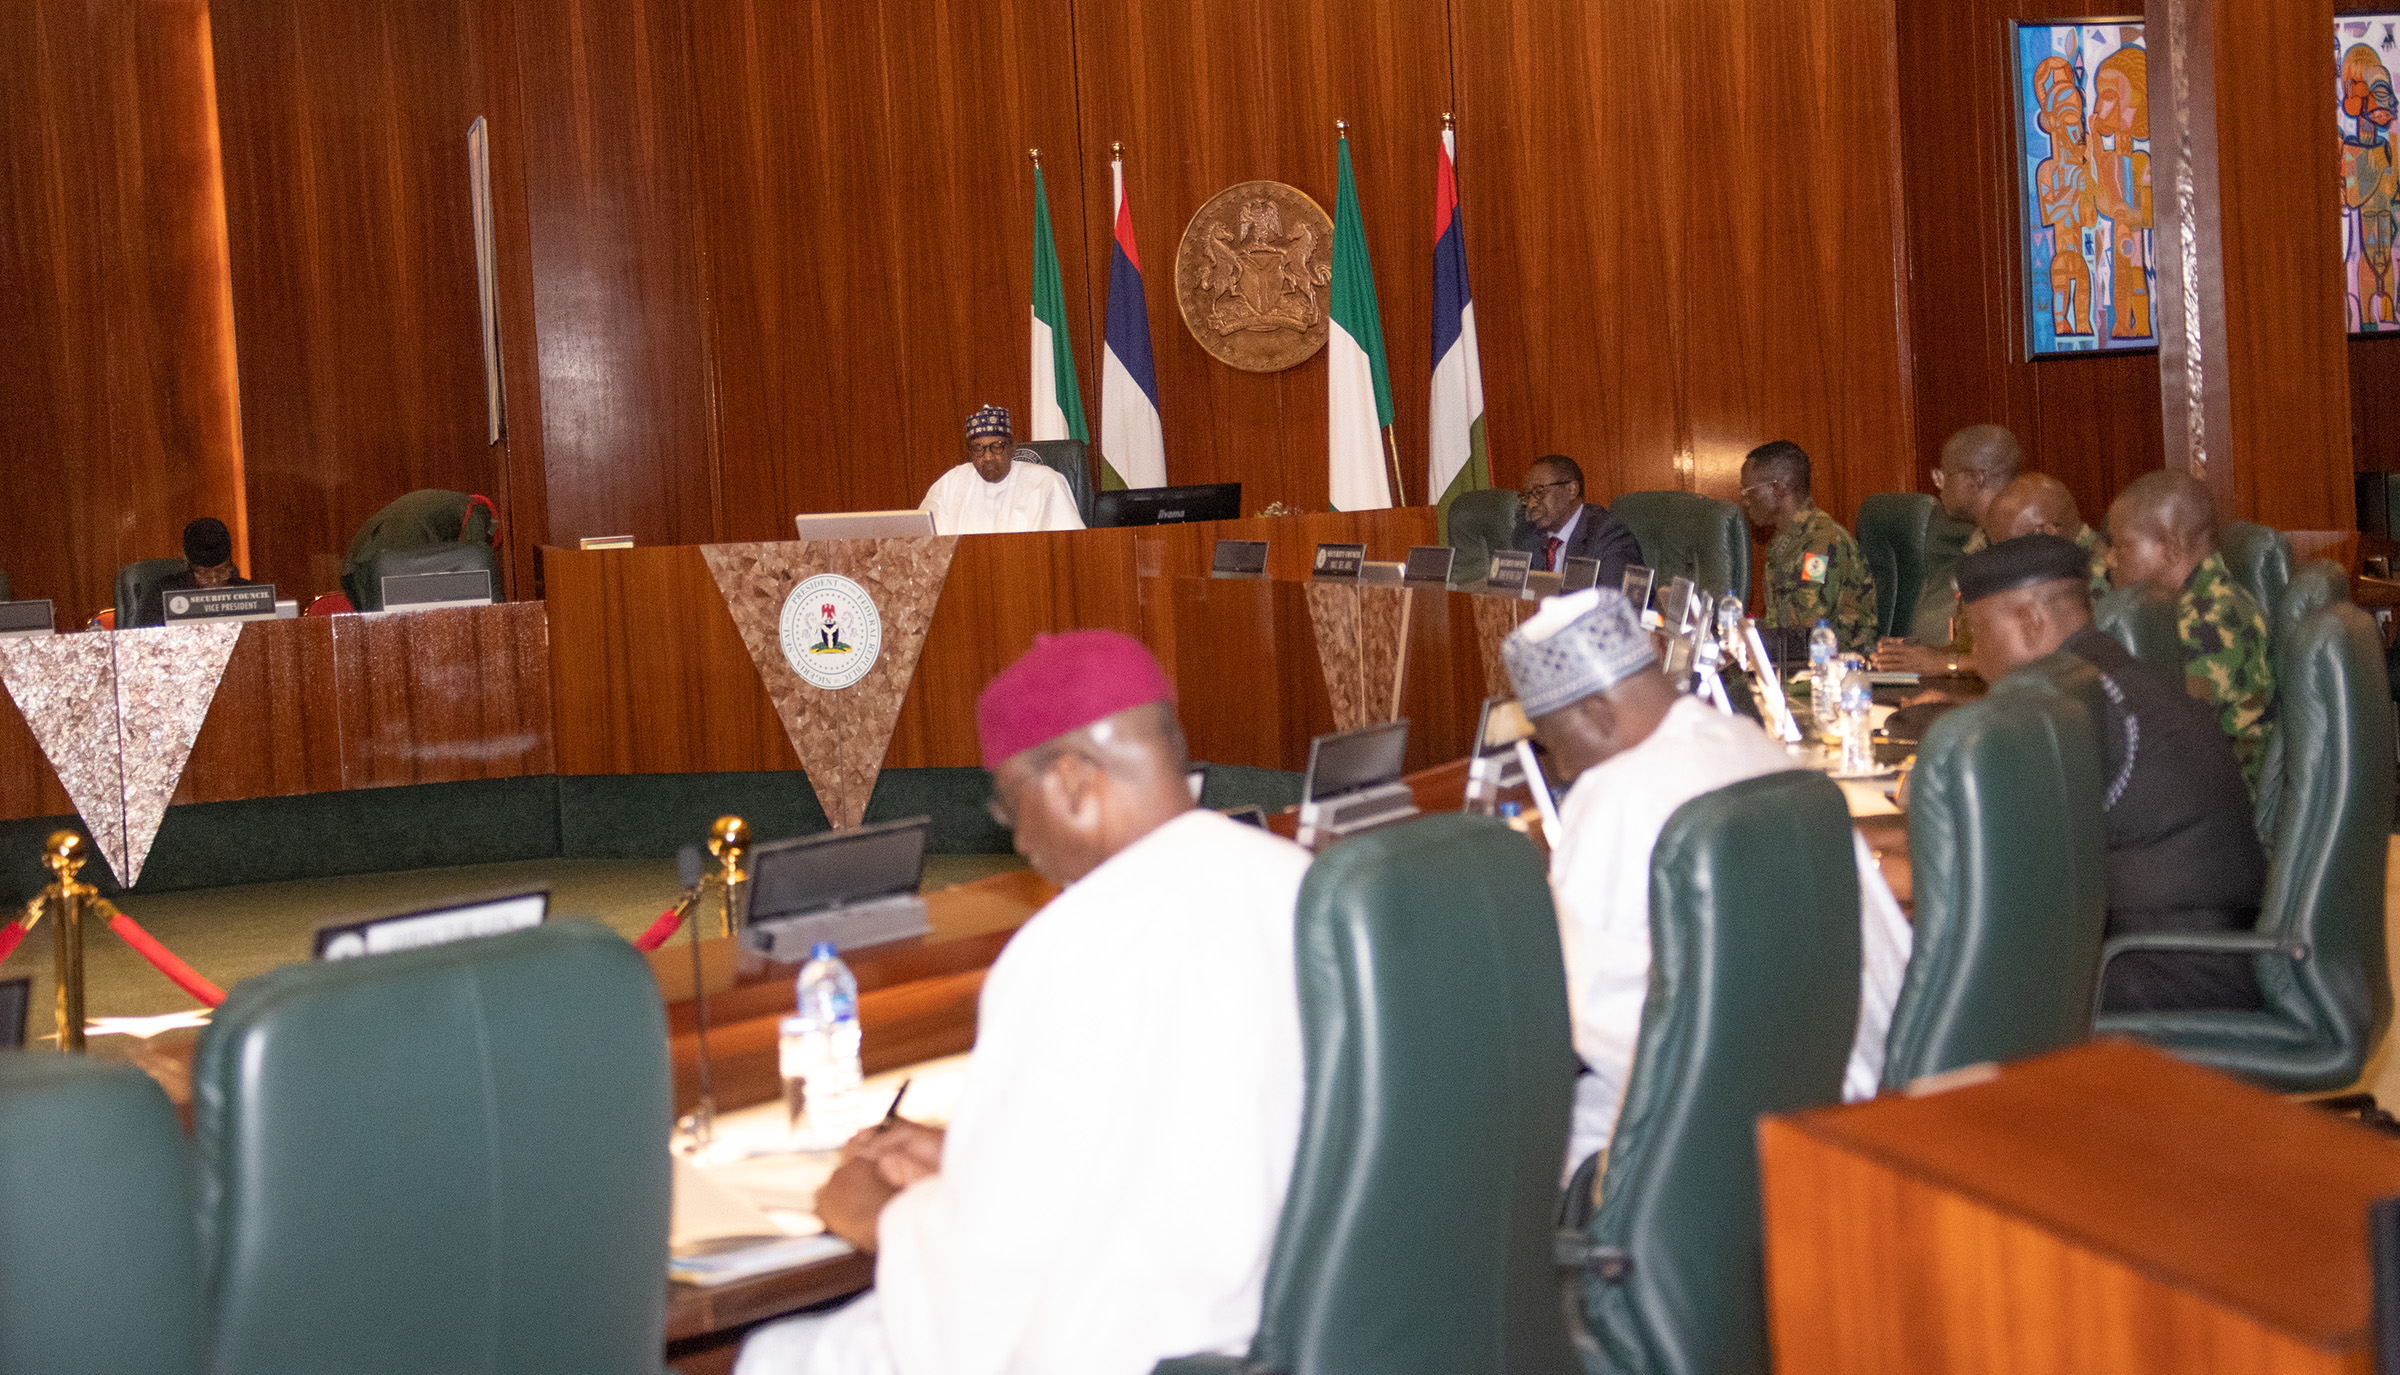 PRESIDENT BUHARI PRESIDES OVER AN EMERGENCY SECURITY MEETING.